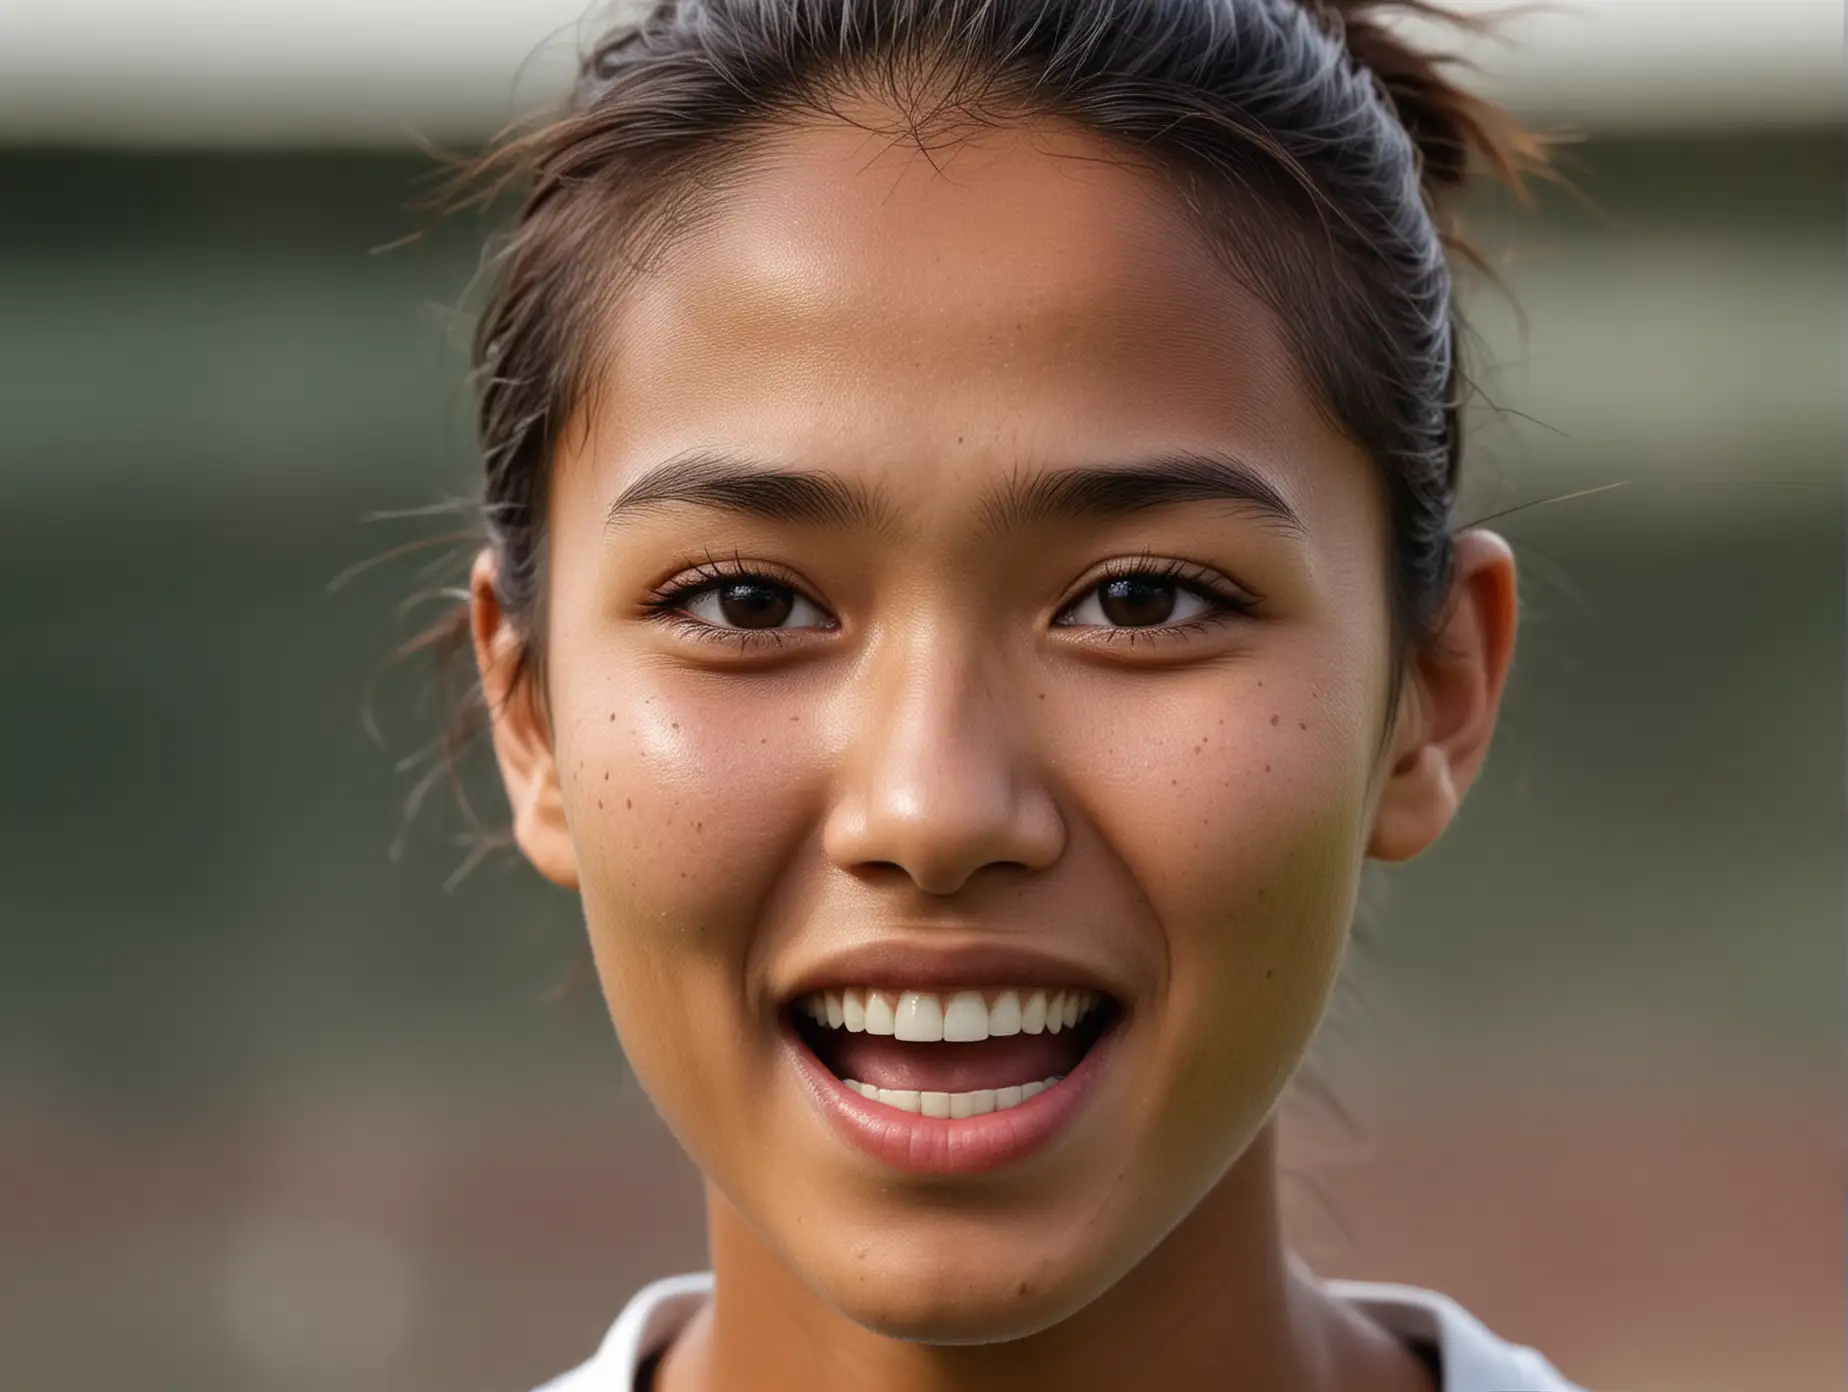 Close up natural face without make-up of a beautiful very skinny indonesian women's college soccer player celebrating a goal with fiercely intense eyes and a joyful smile.